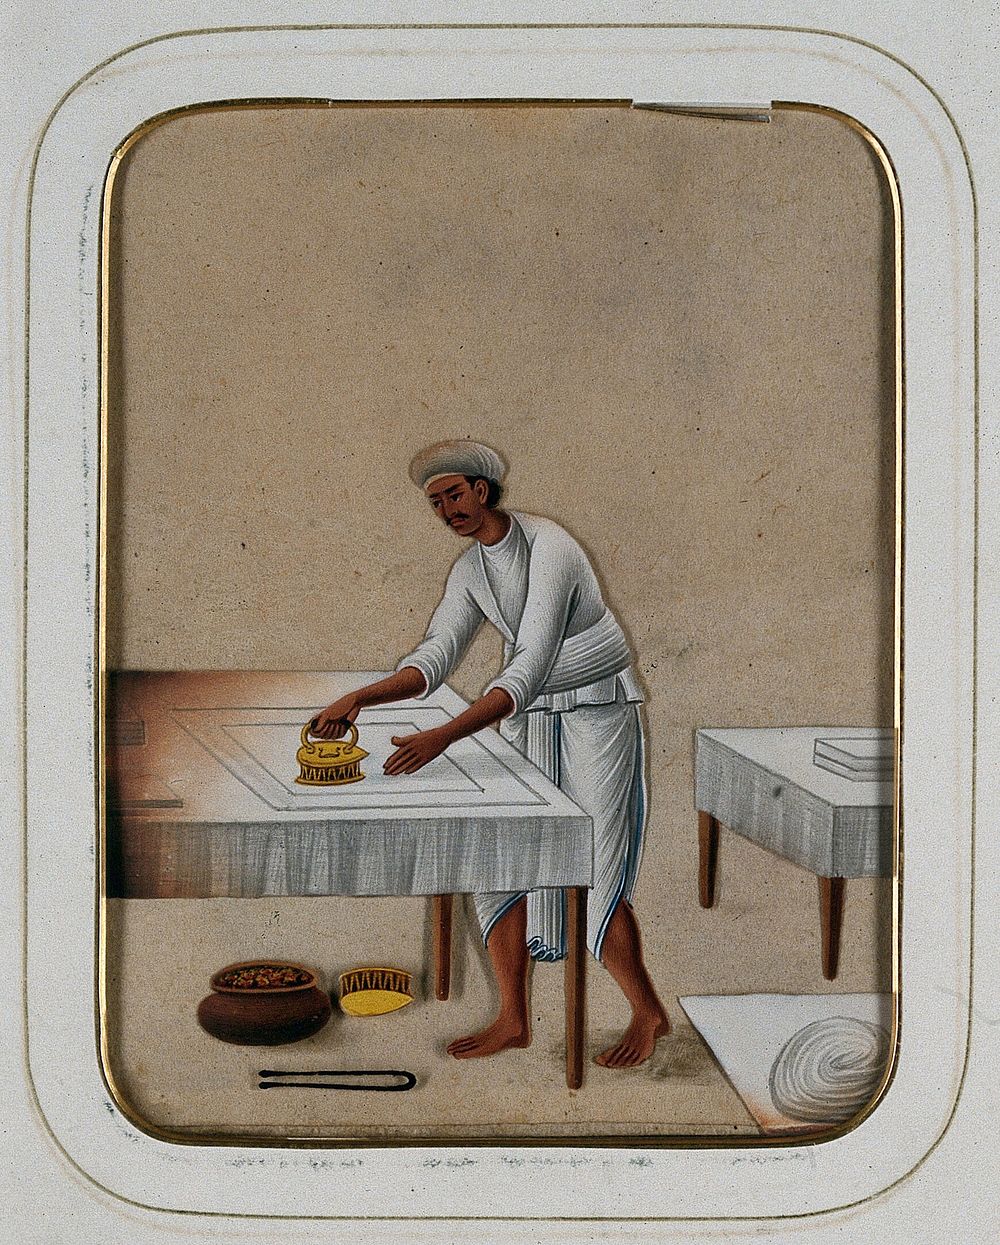 A man ironing clothes. Gouache painting on mica by an Indian artist.